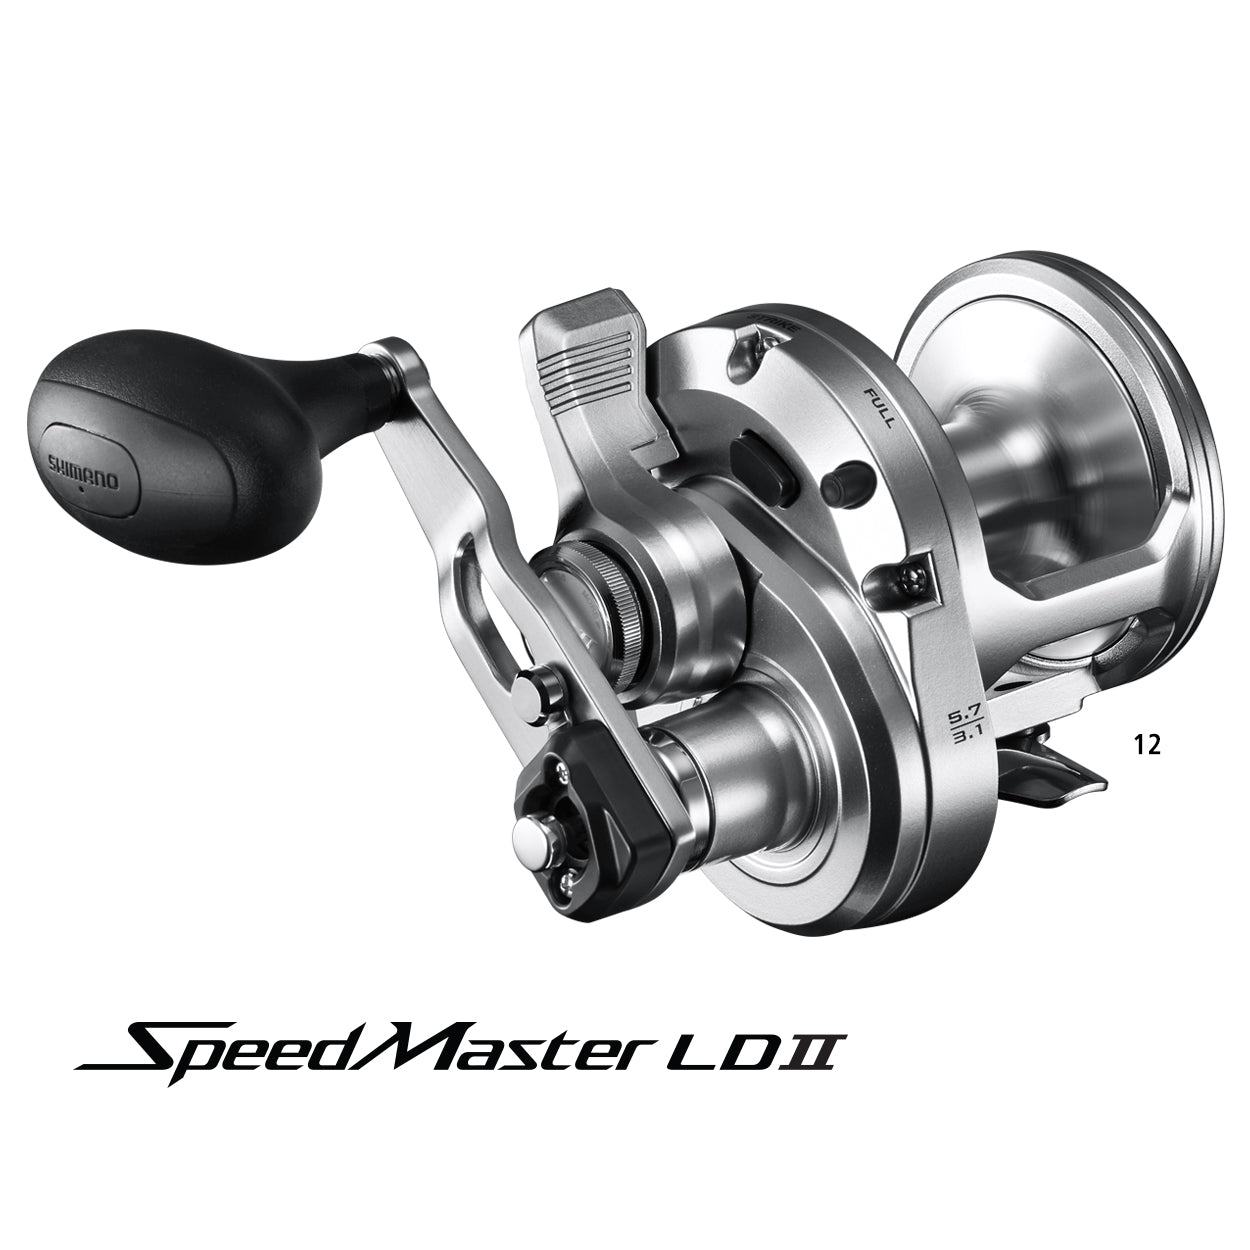 Shimano Speed Master - Compleat Angler Nedlands